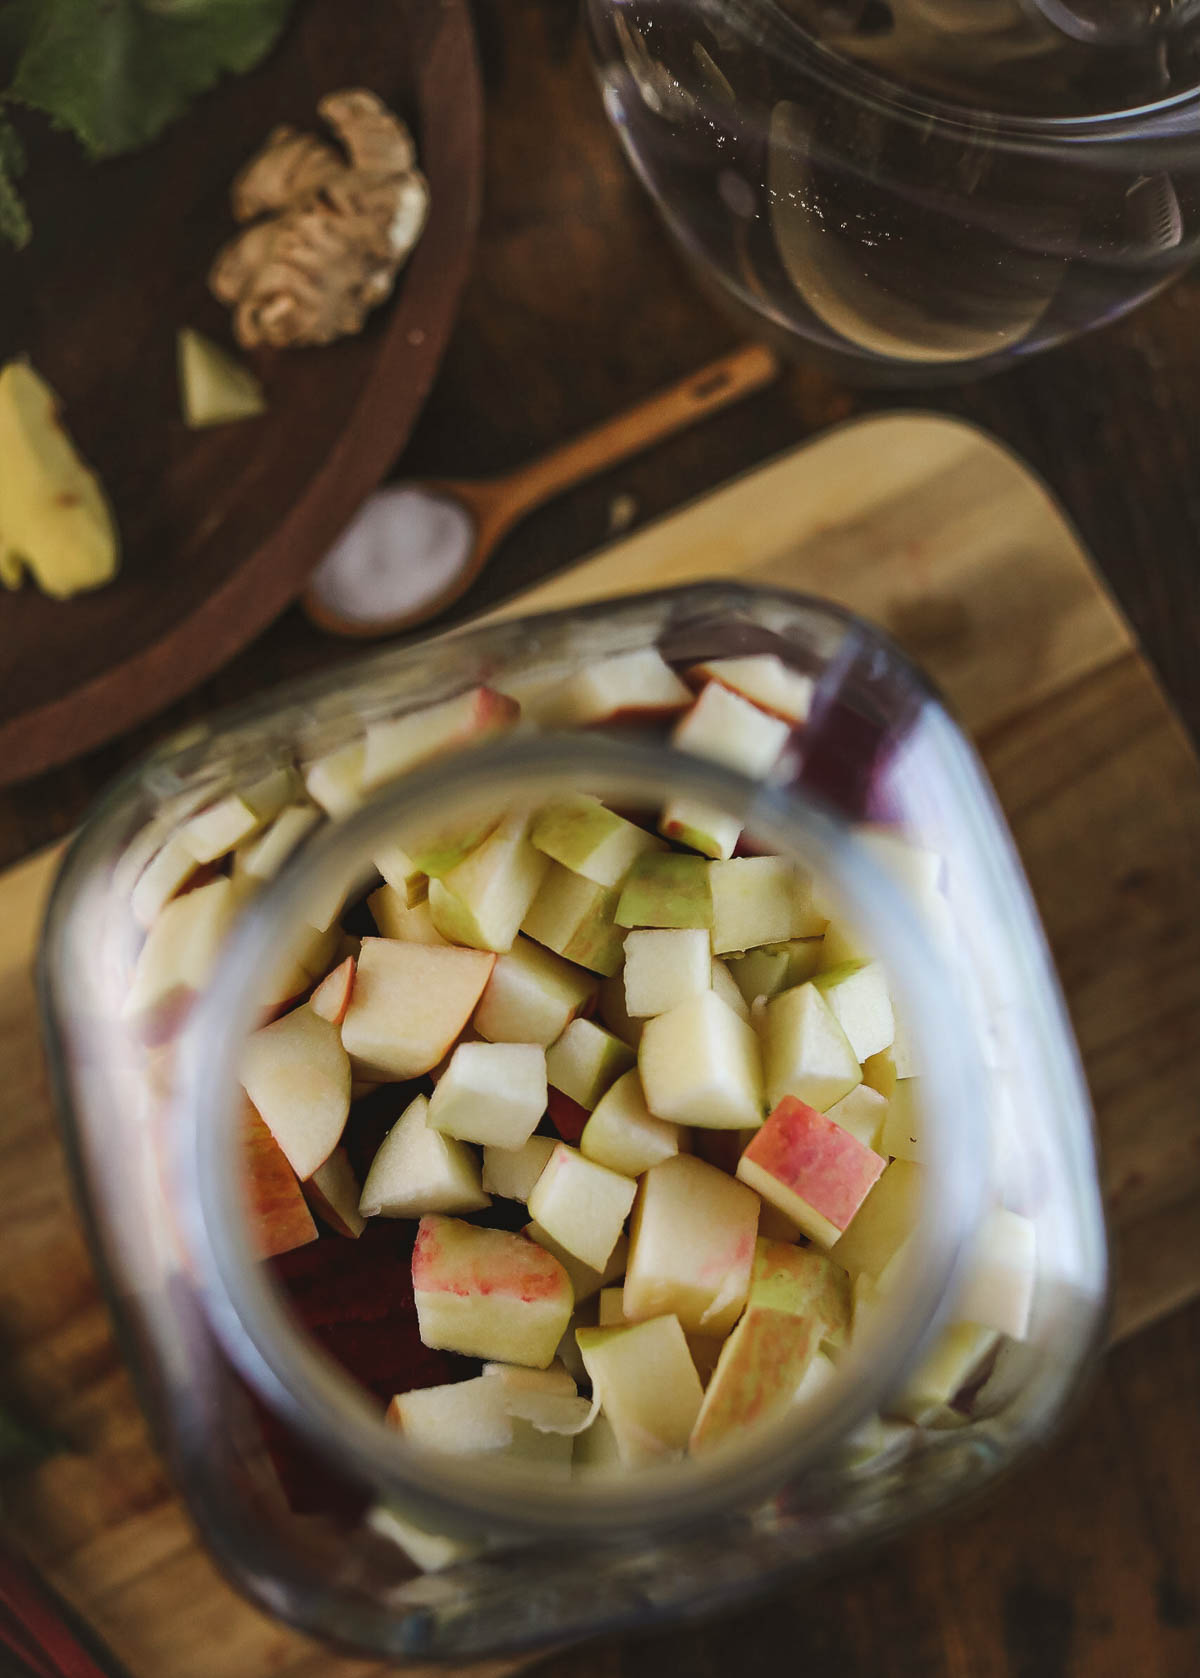 Chopped apples being added to the jar of chopped beets.